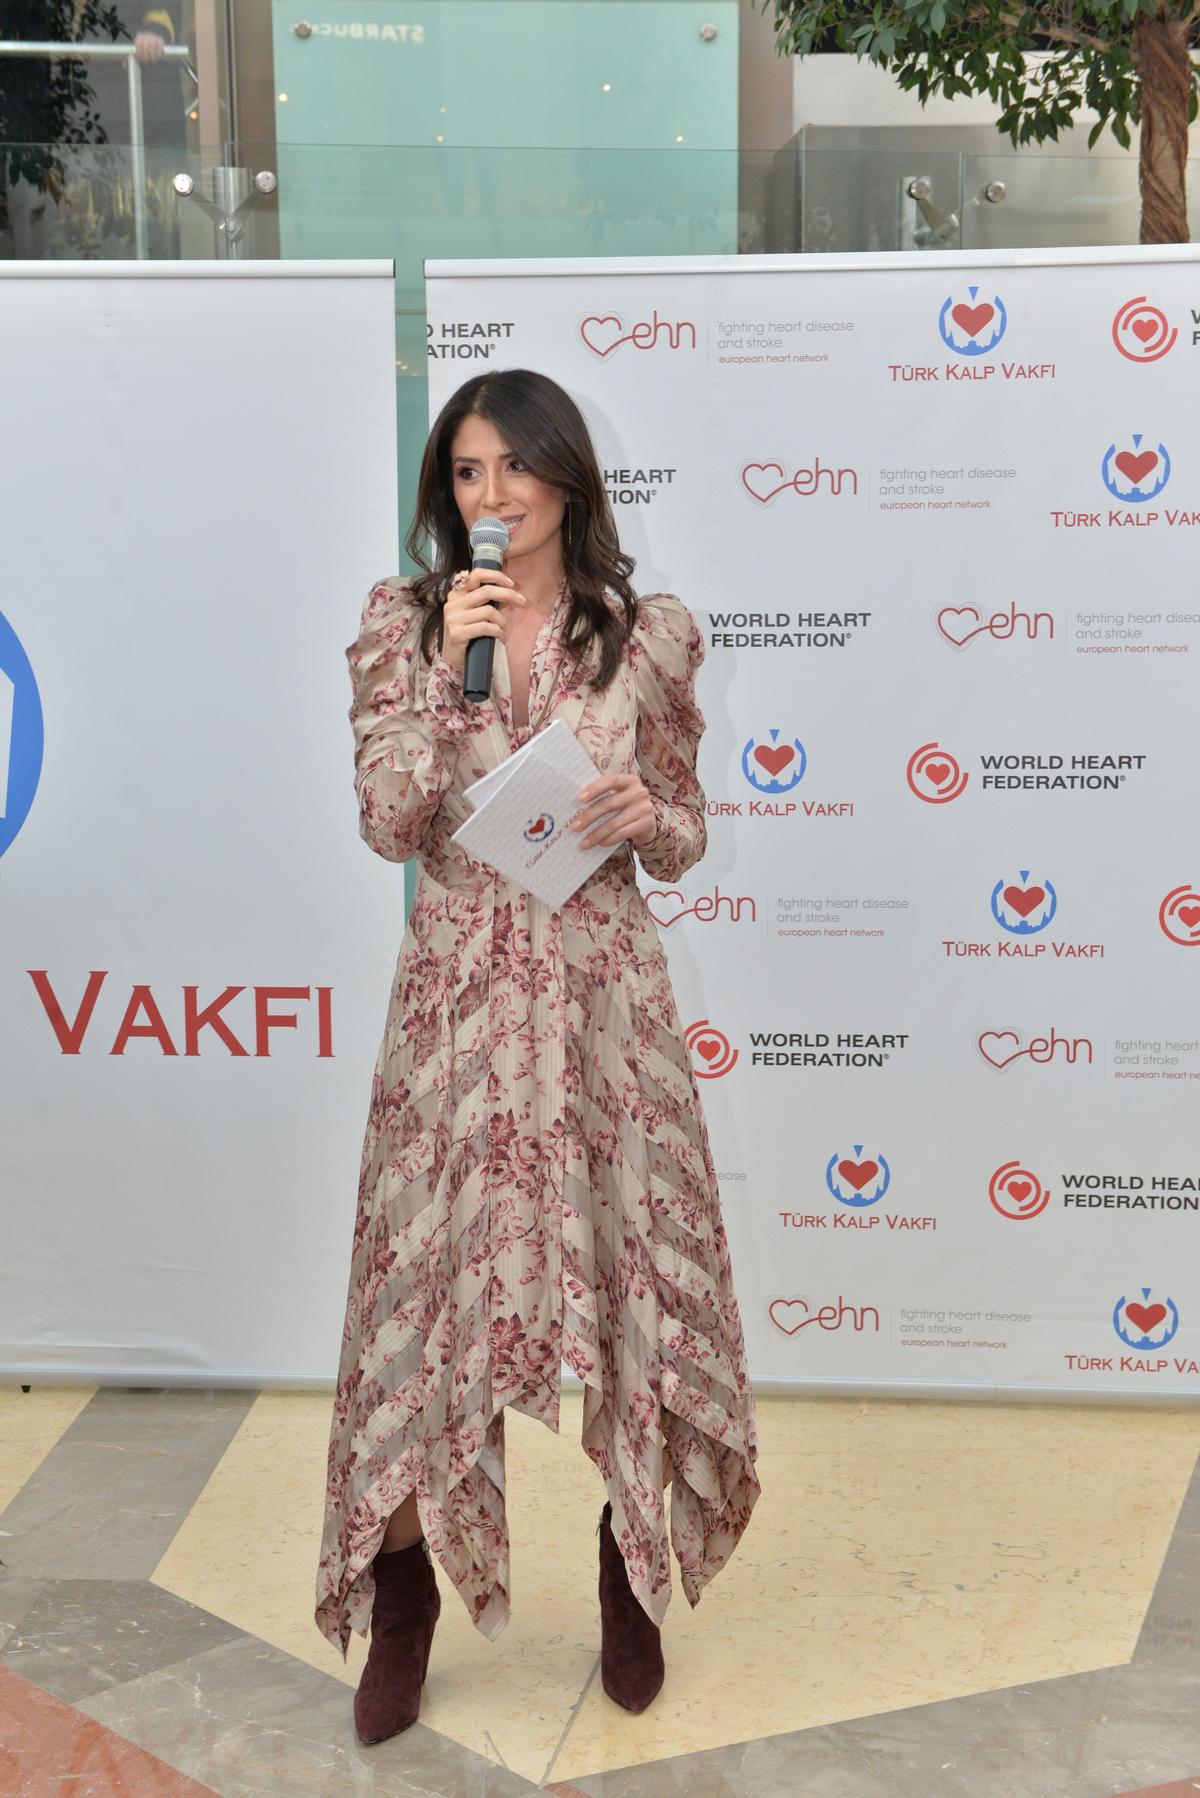 Aksoy has been active with the Turkish Heart Foundation for ten years / 